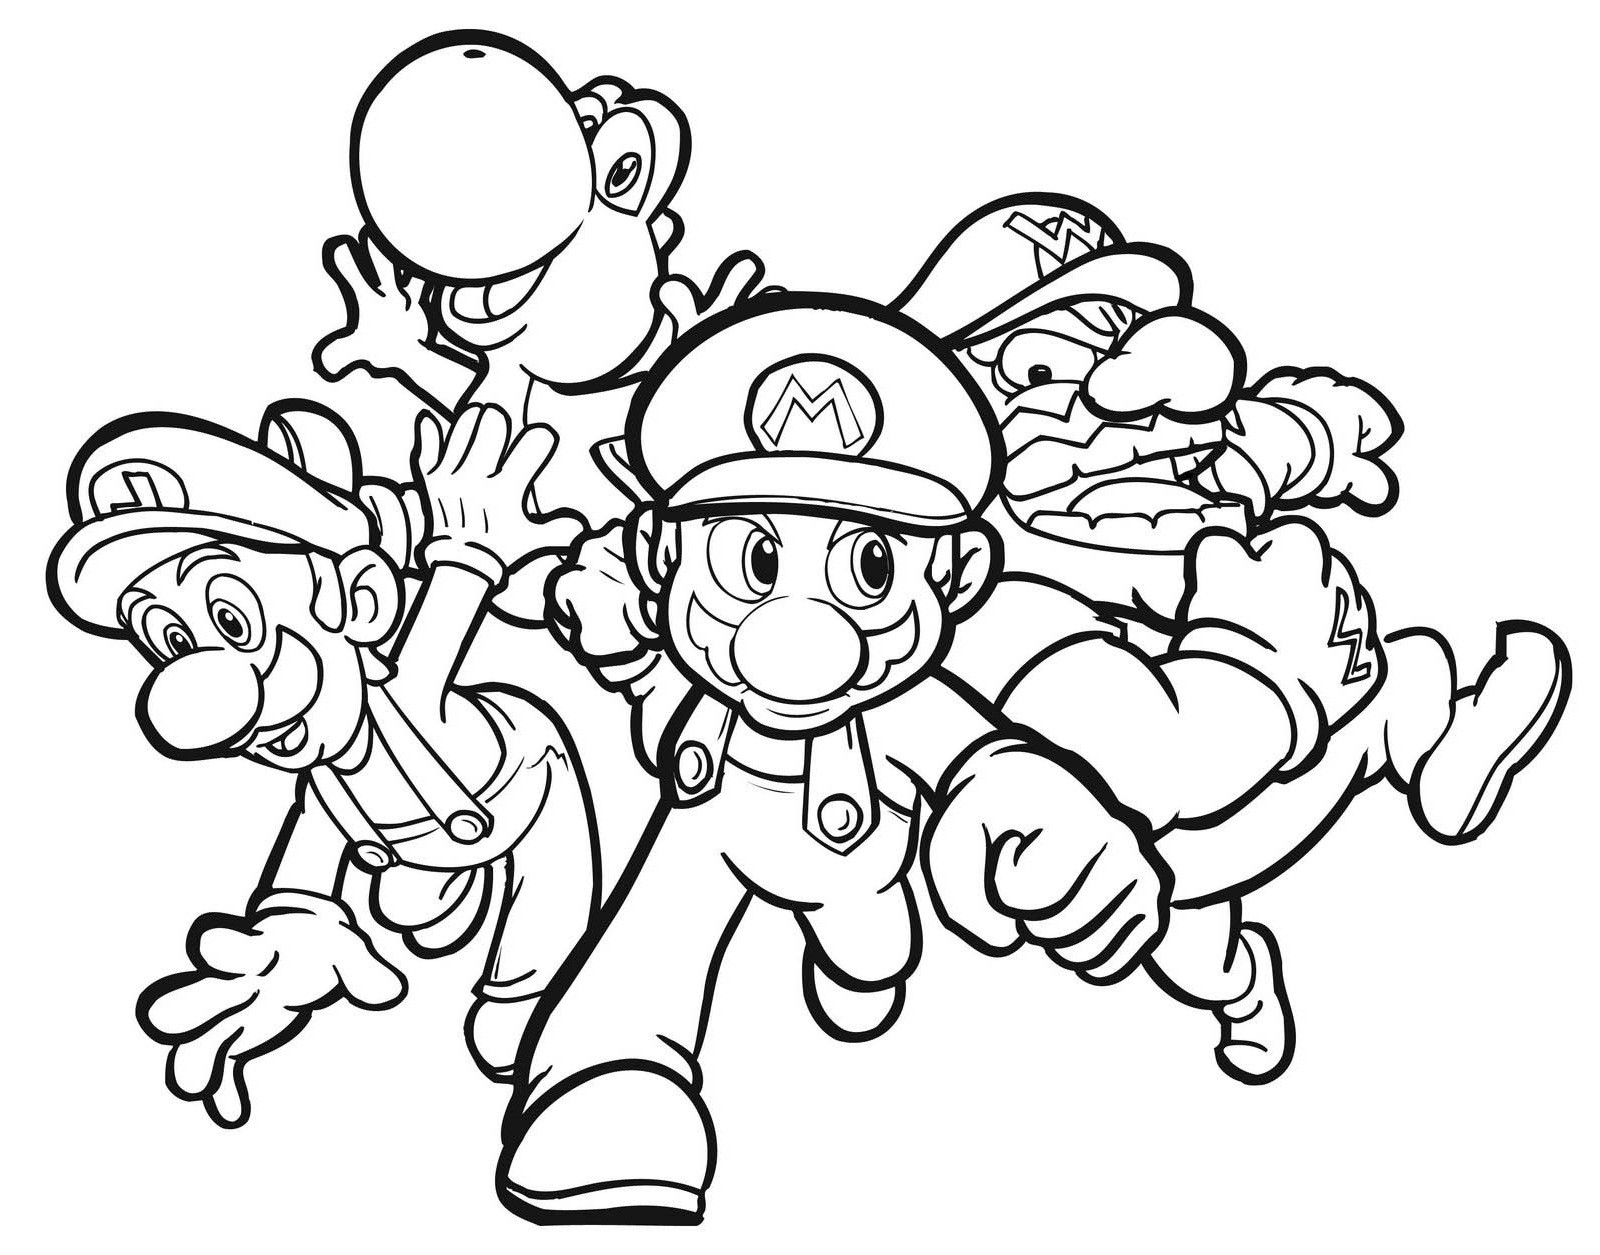 Mario Coloring Pages For Kids
 colouring pages of Mario Yoshi Luigi and Wario for kids